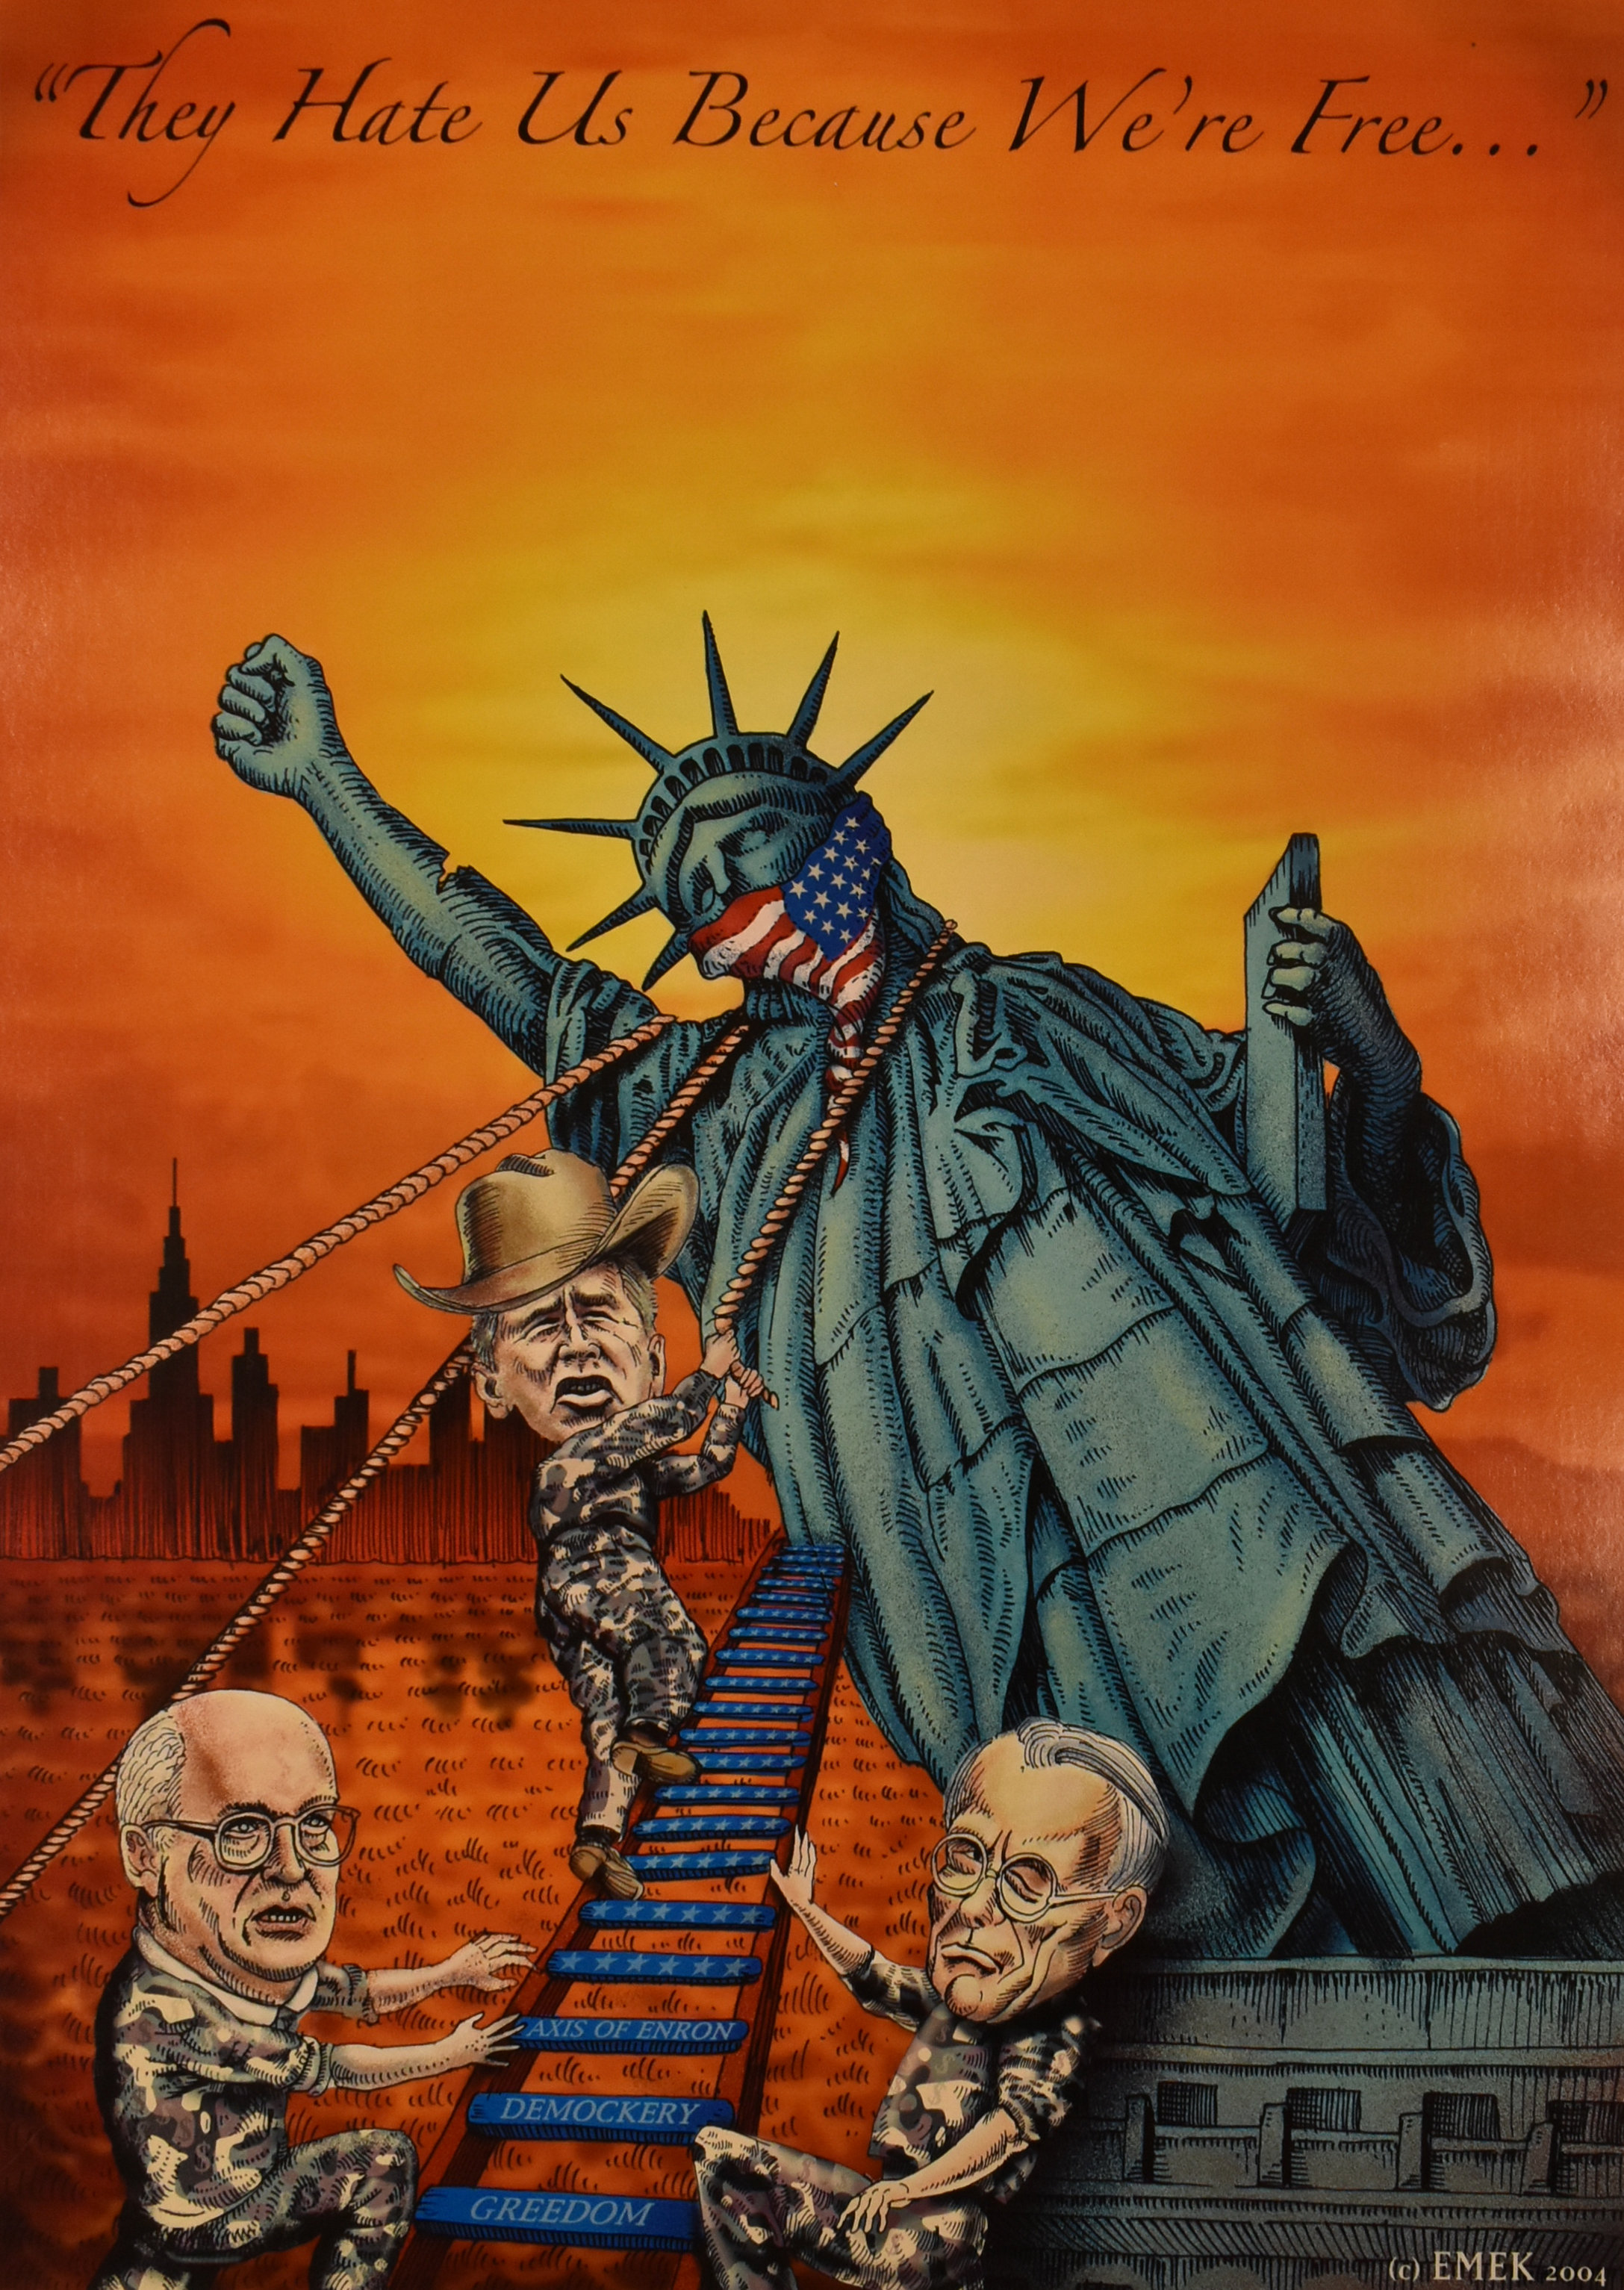 EMEK GOLAN - "THEY HATE US BECAUSE WE WE'RE FREE..." 2004 - Image 2 of 9